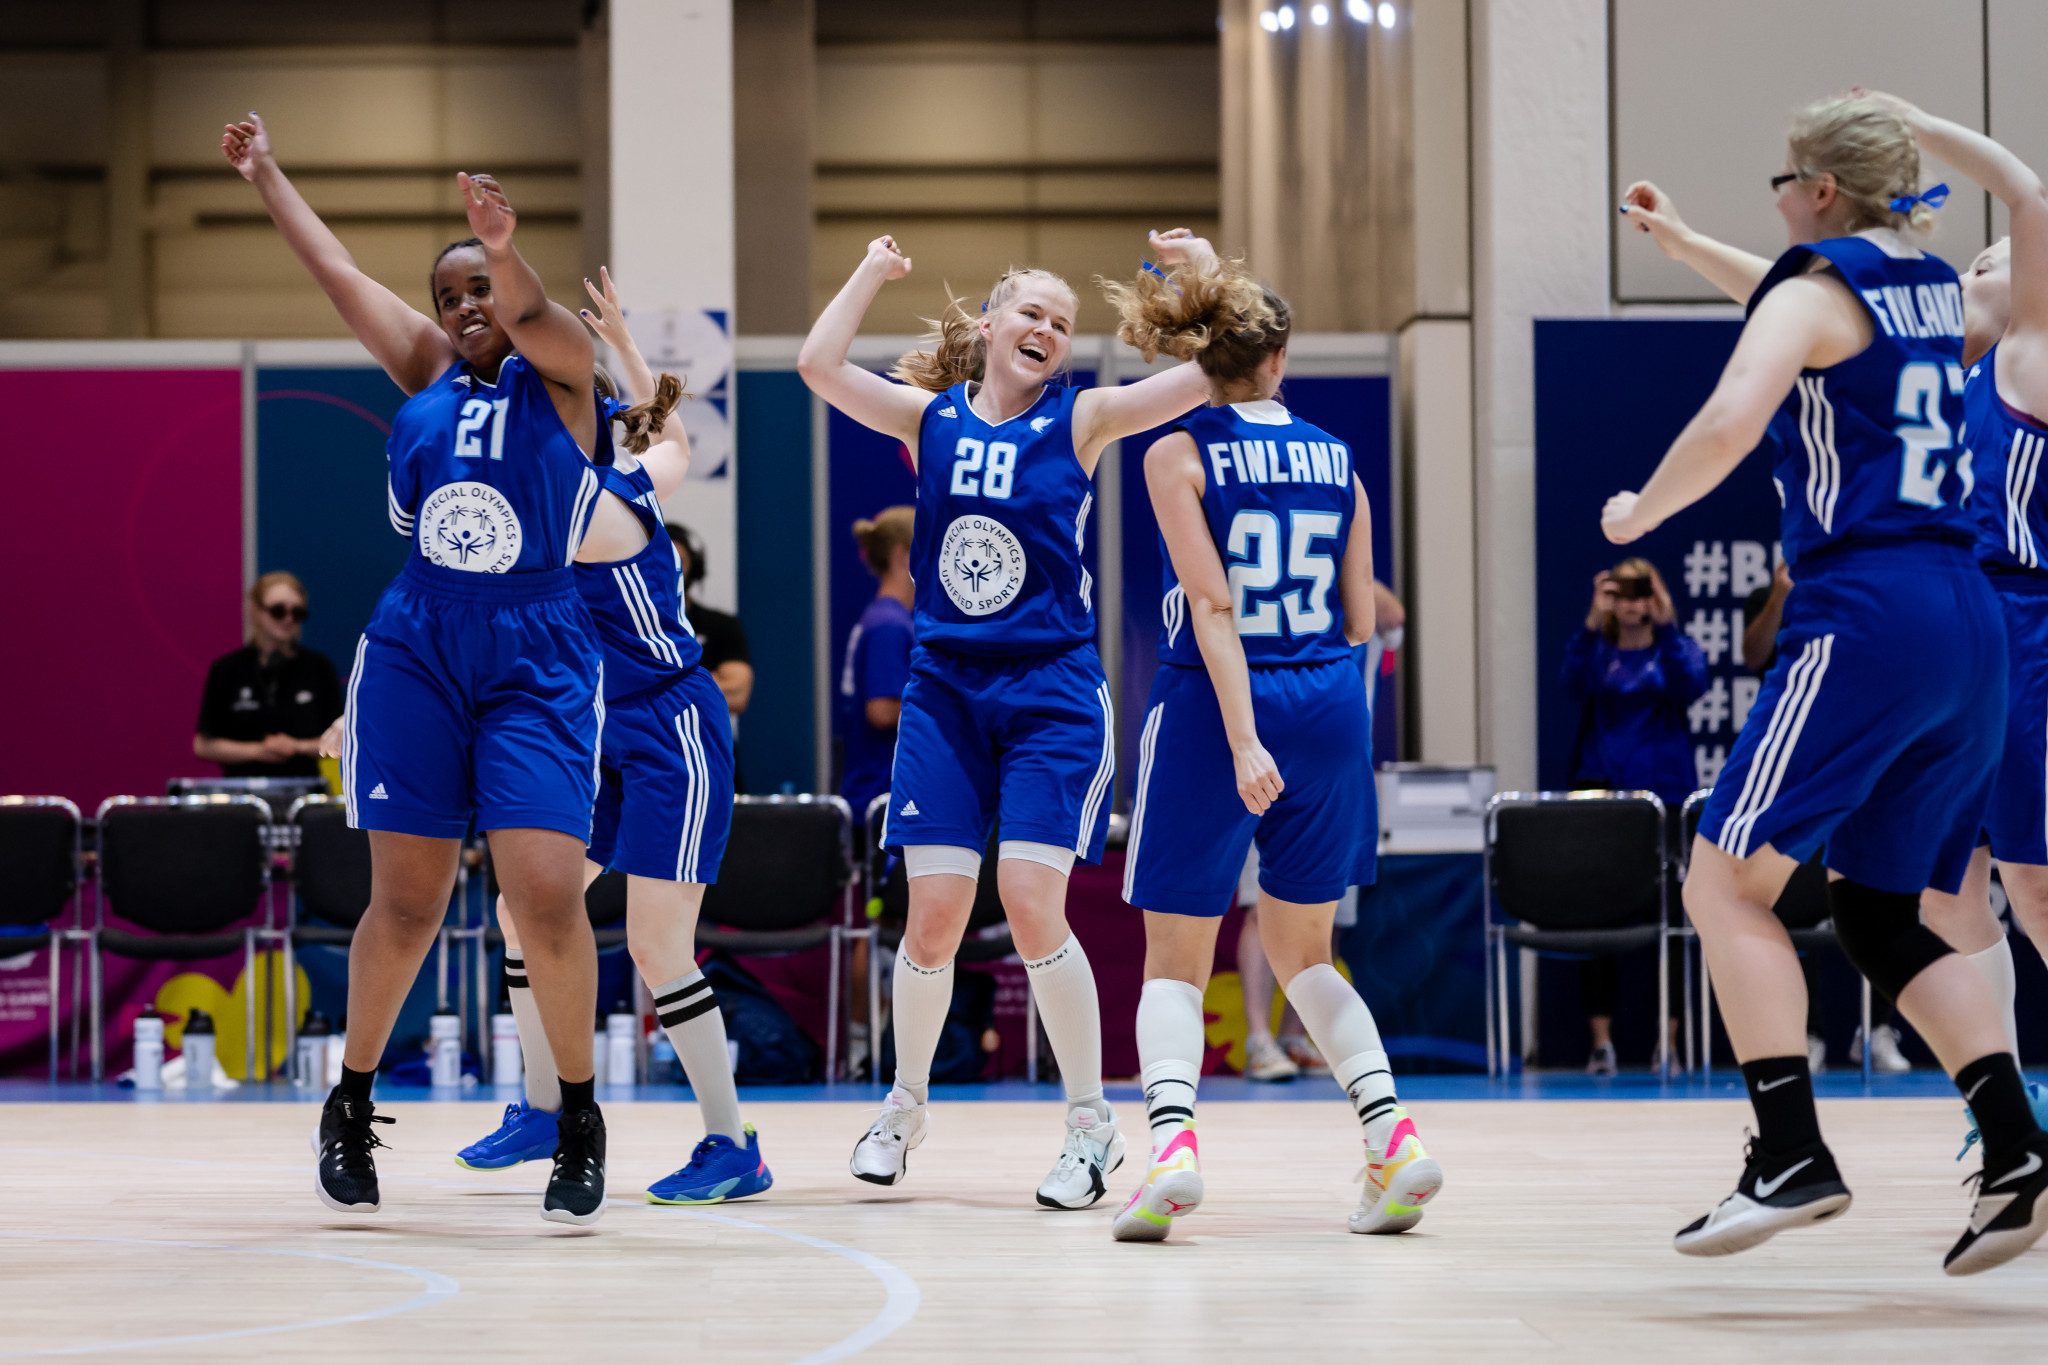 Finland beat Egypt in the women's unified two final to take gold in Berlin ©Special Olympics World Games